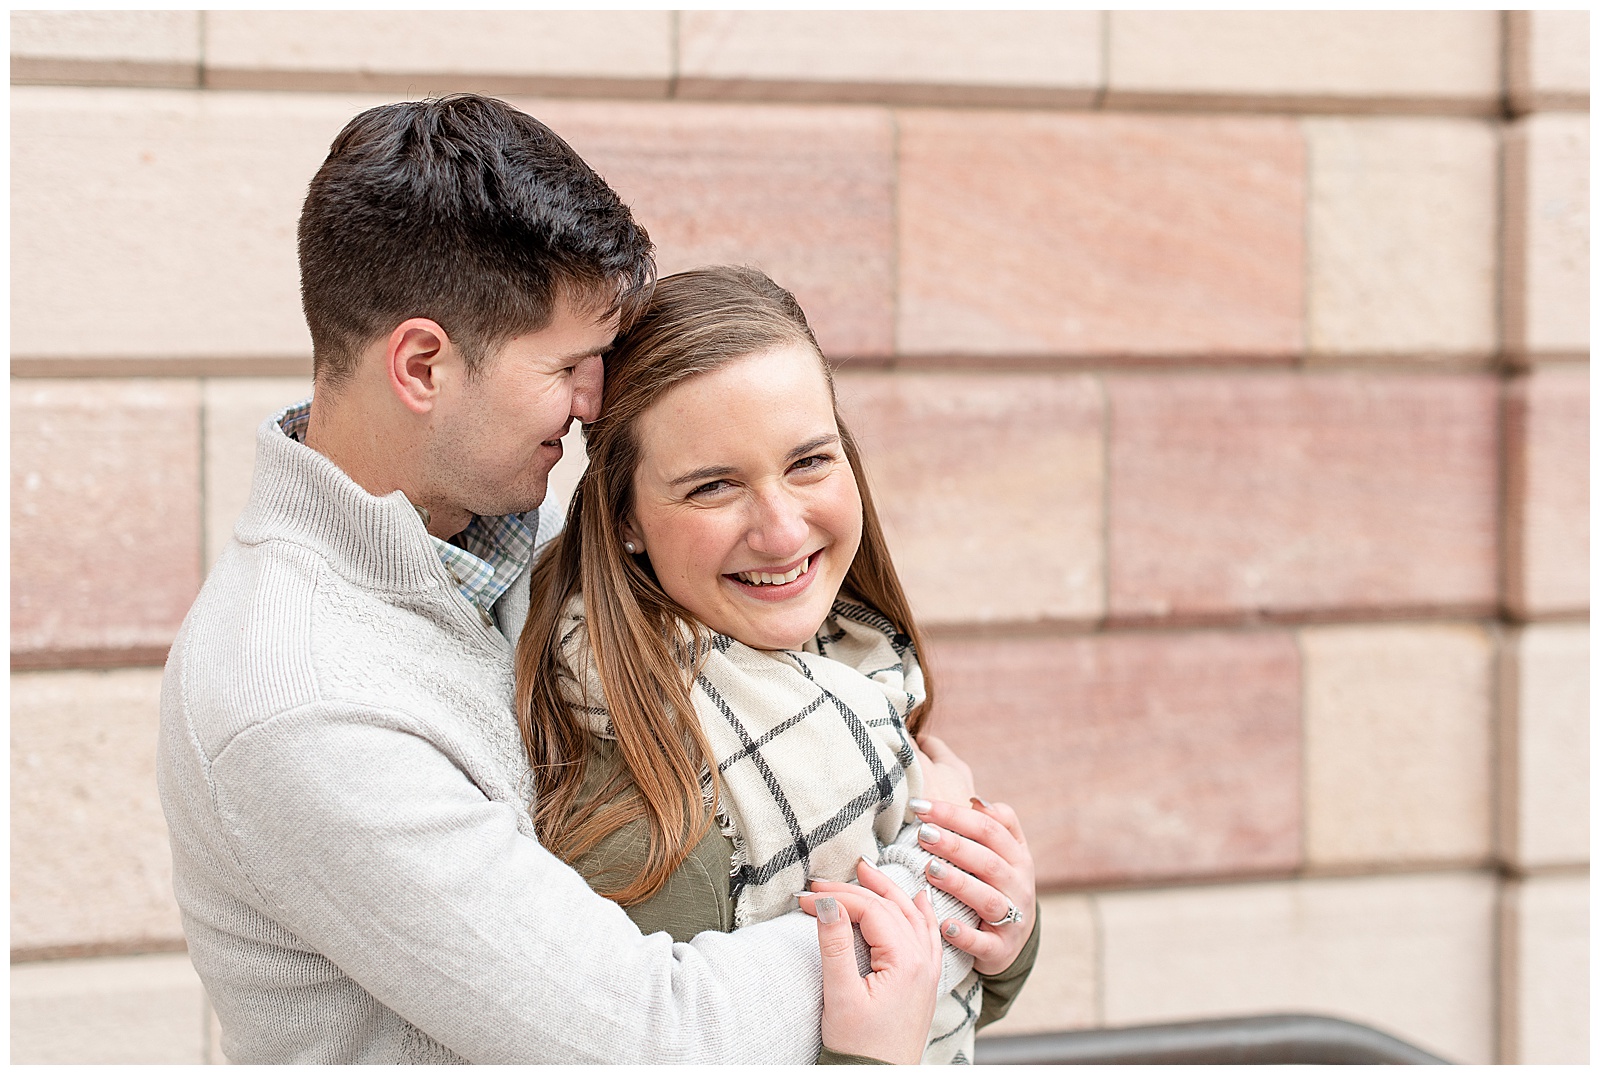 guy has arms wrapped around girl nuzzling into her temple as she is smiling at the camera